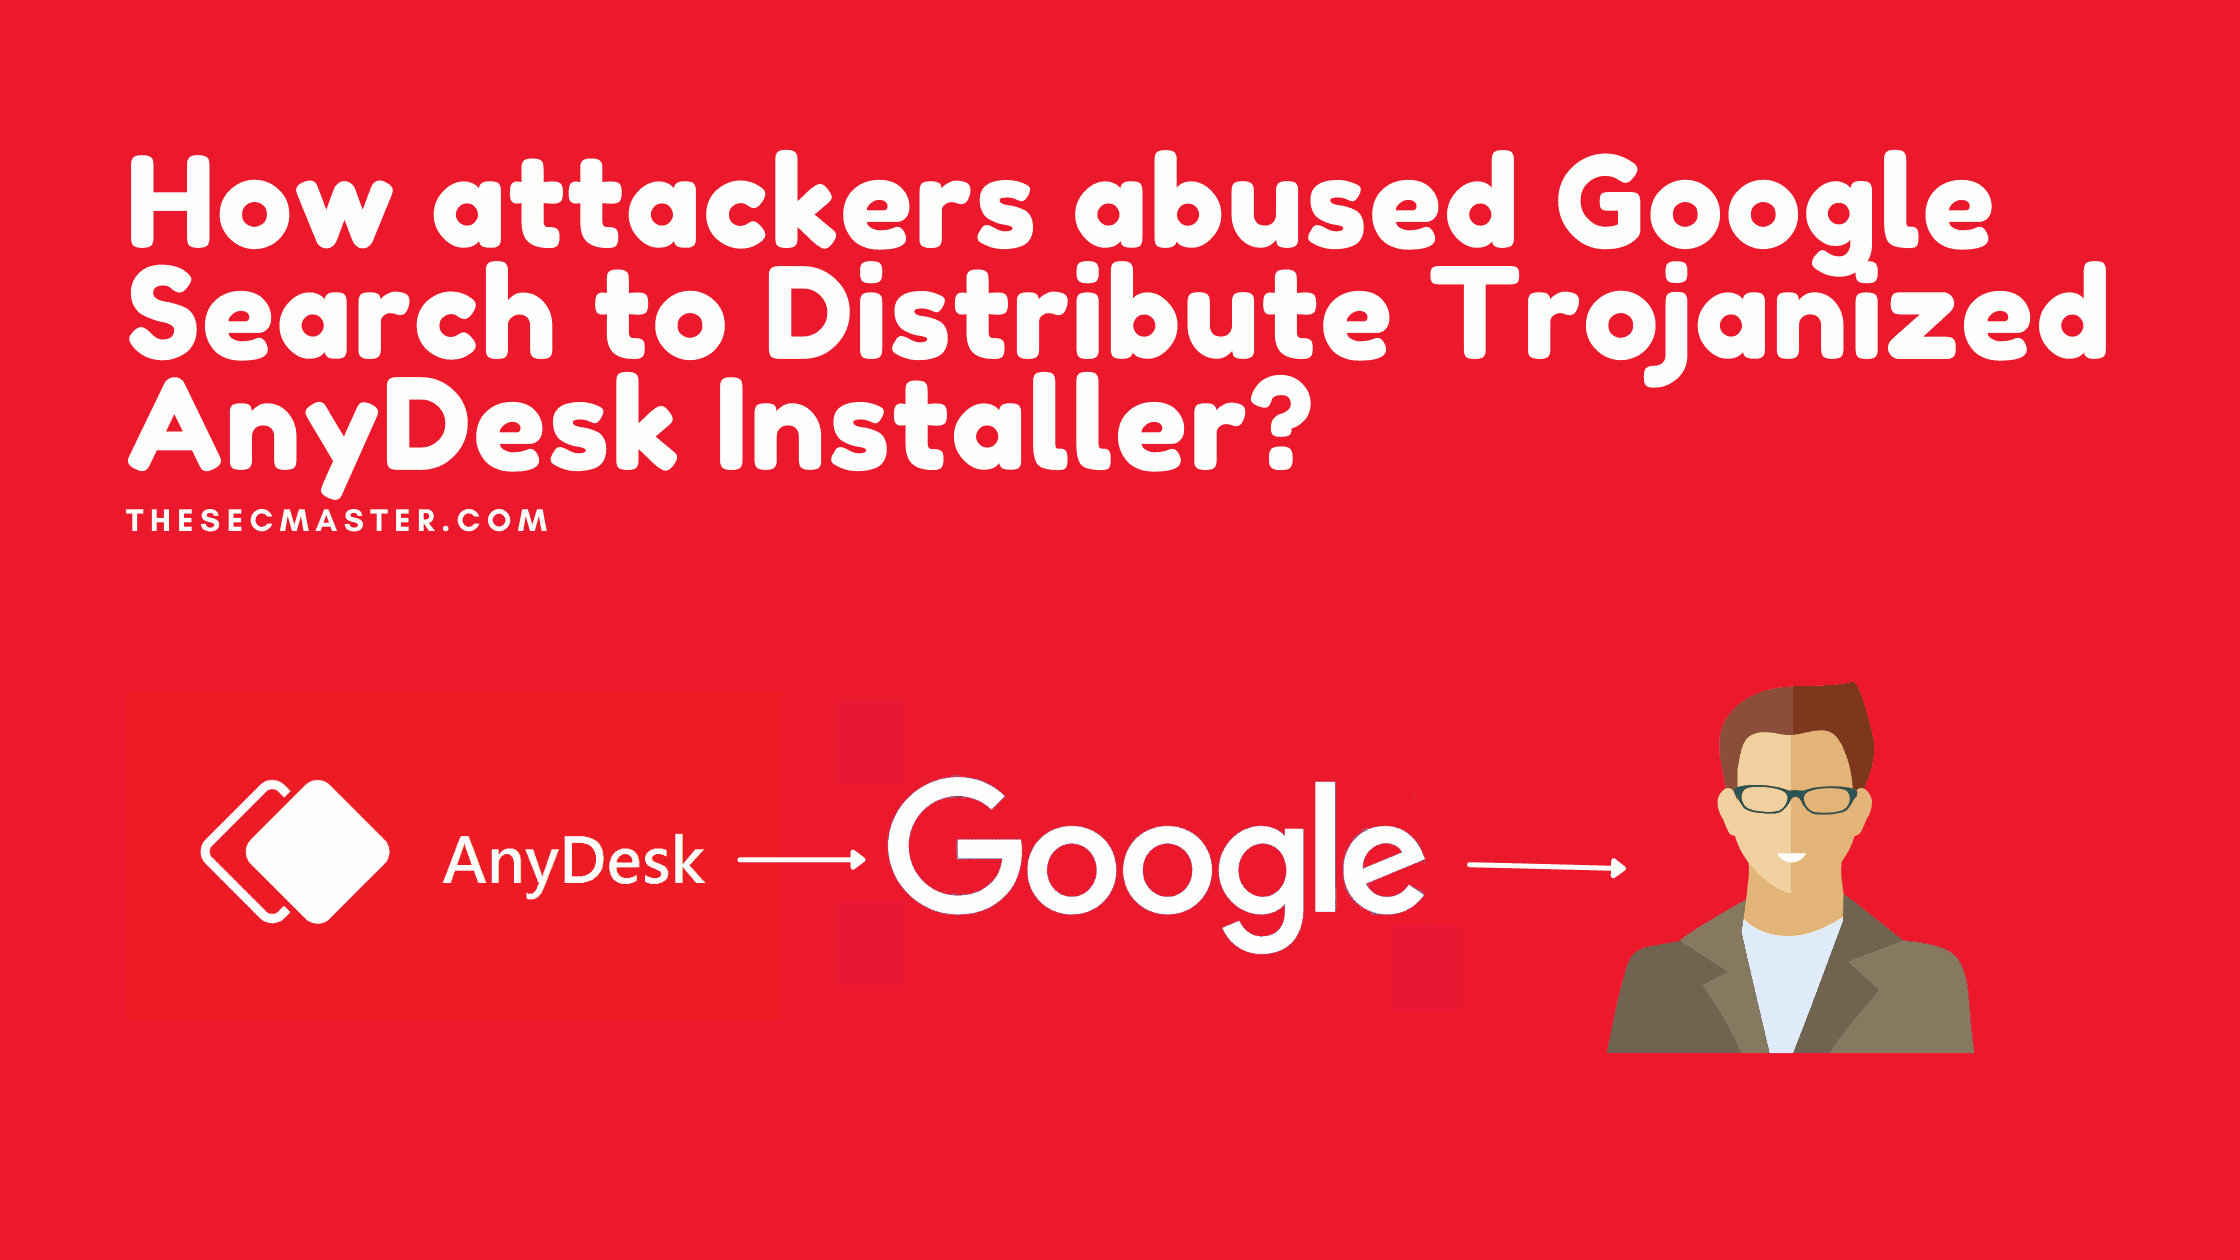 How Attackers Abused Google Search To Distribute Trojanized Anydesk Installer